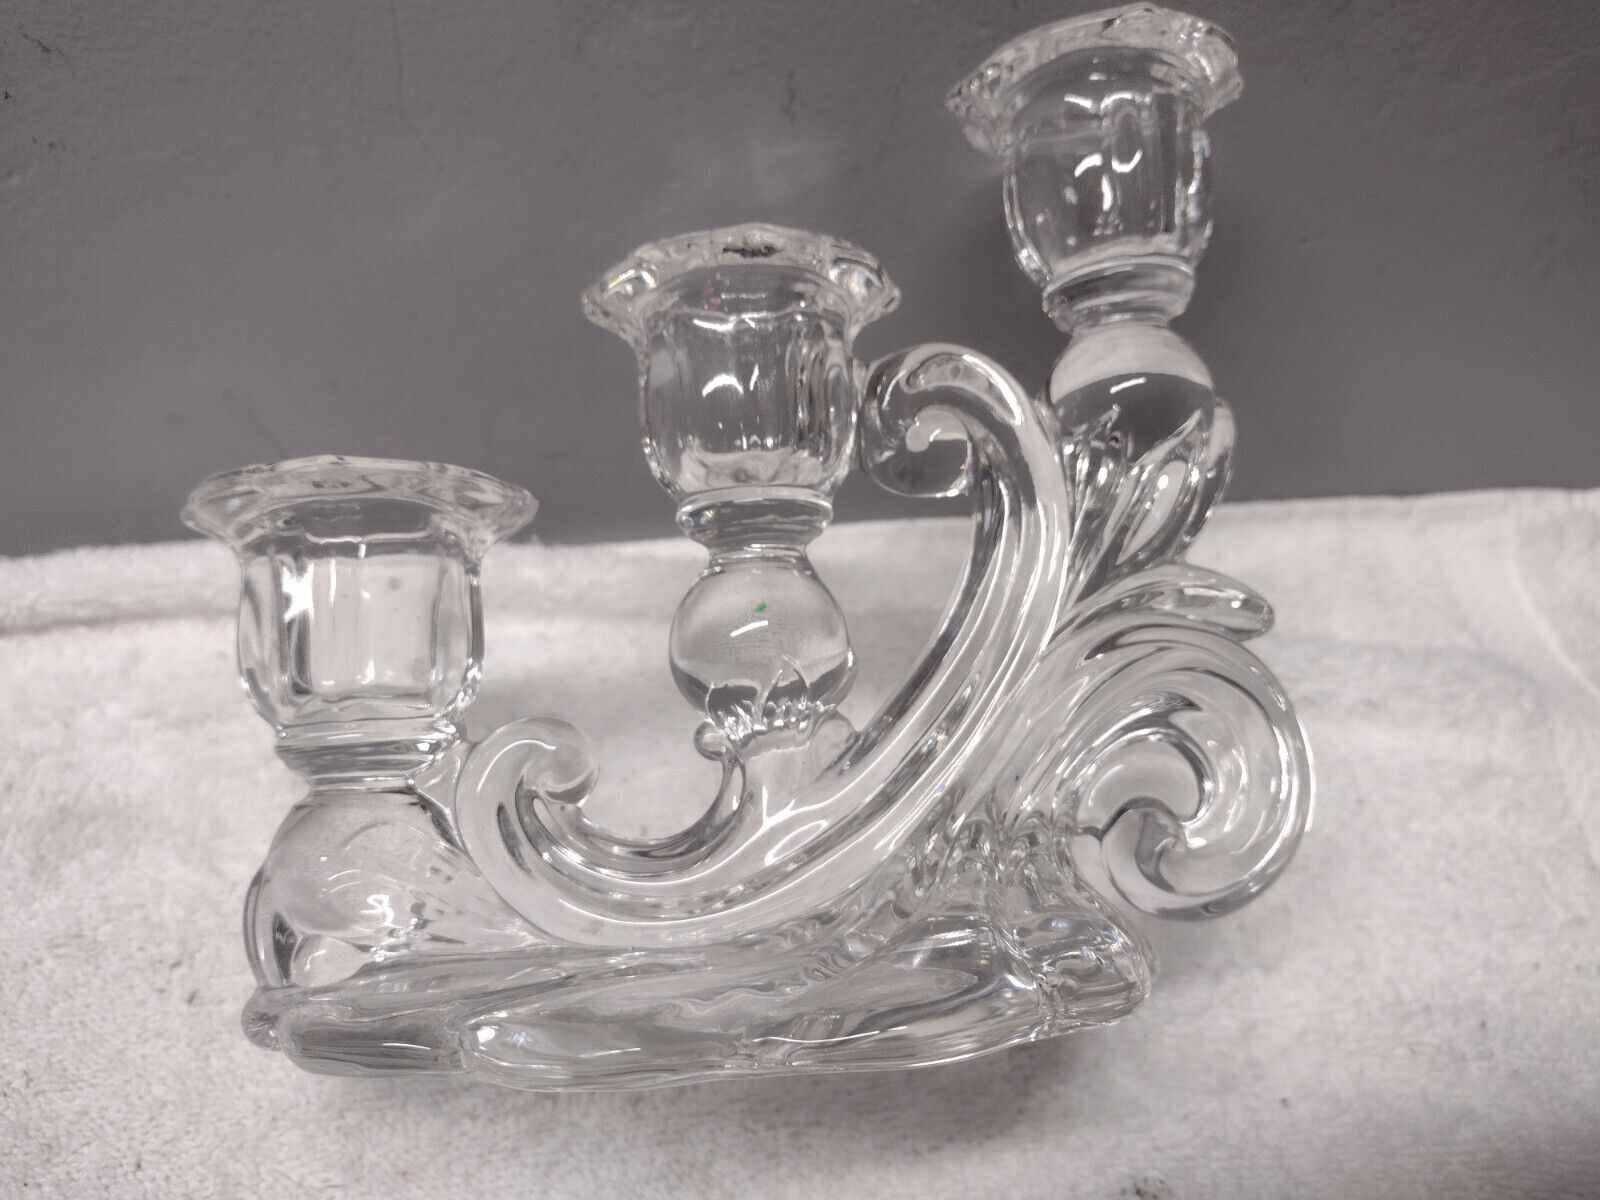 Vintage Cambridge Caprice three-light cascade candle holder in clear glass